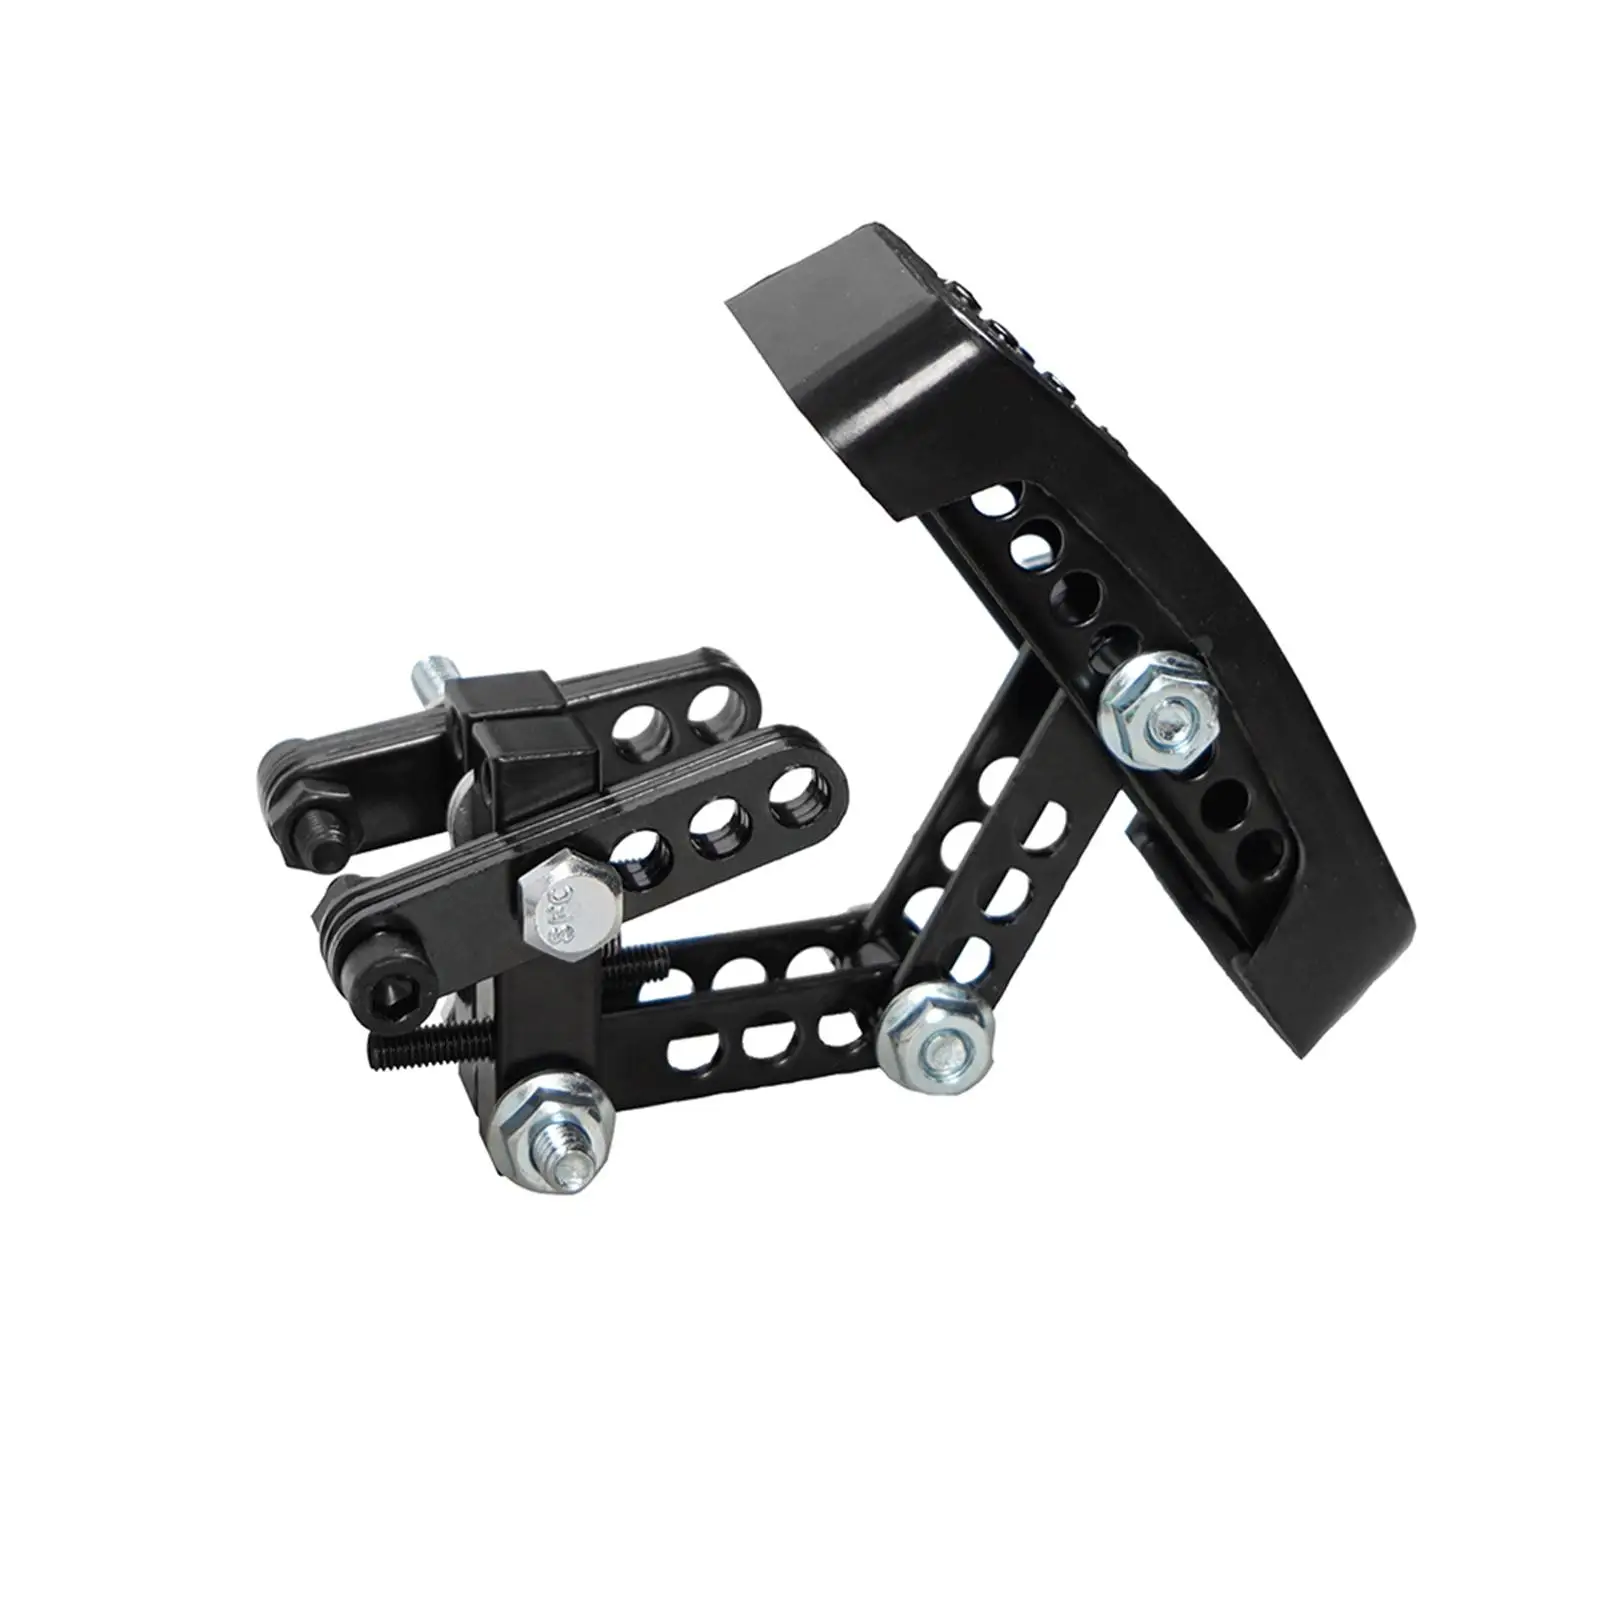 Universal Car Brake Pedal , Pedal Extension Enlarge Pedal Assembly car Anti Slip Pedal for Short Drivers ,Vehicle Accessories